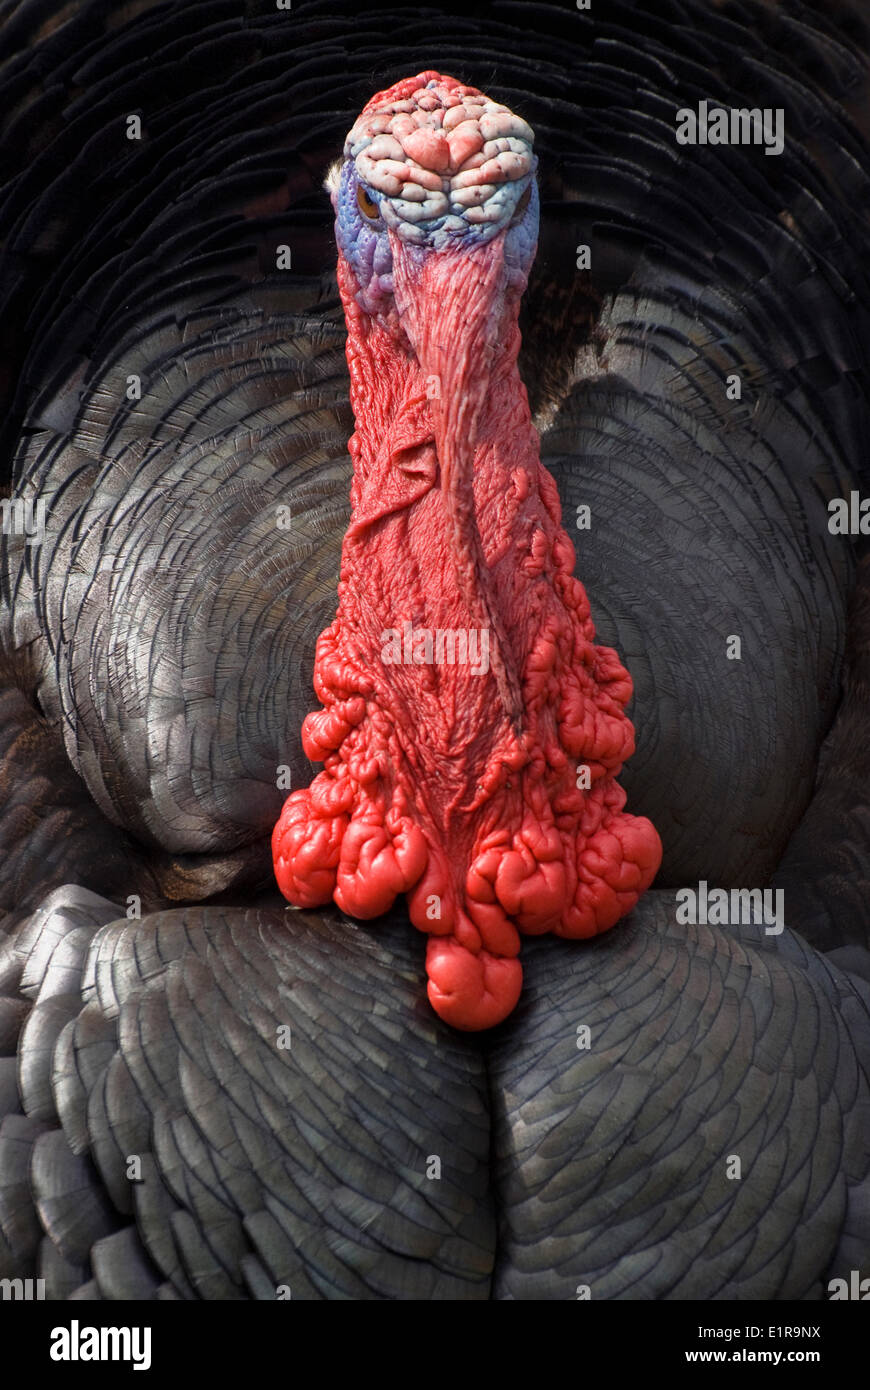 Portrait of a courting Turkey that gets a red head and neck because of excitement Stock Photo